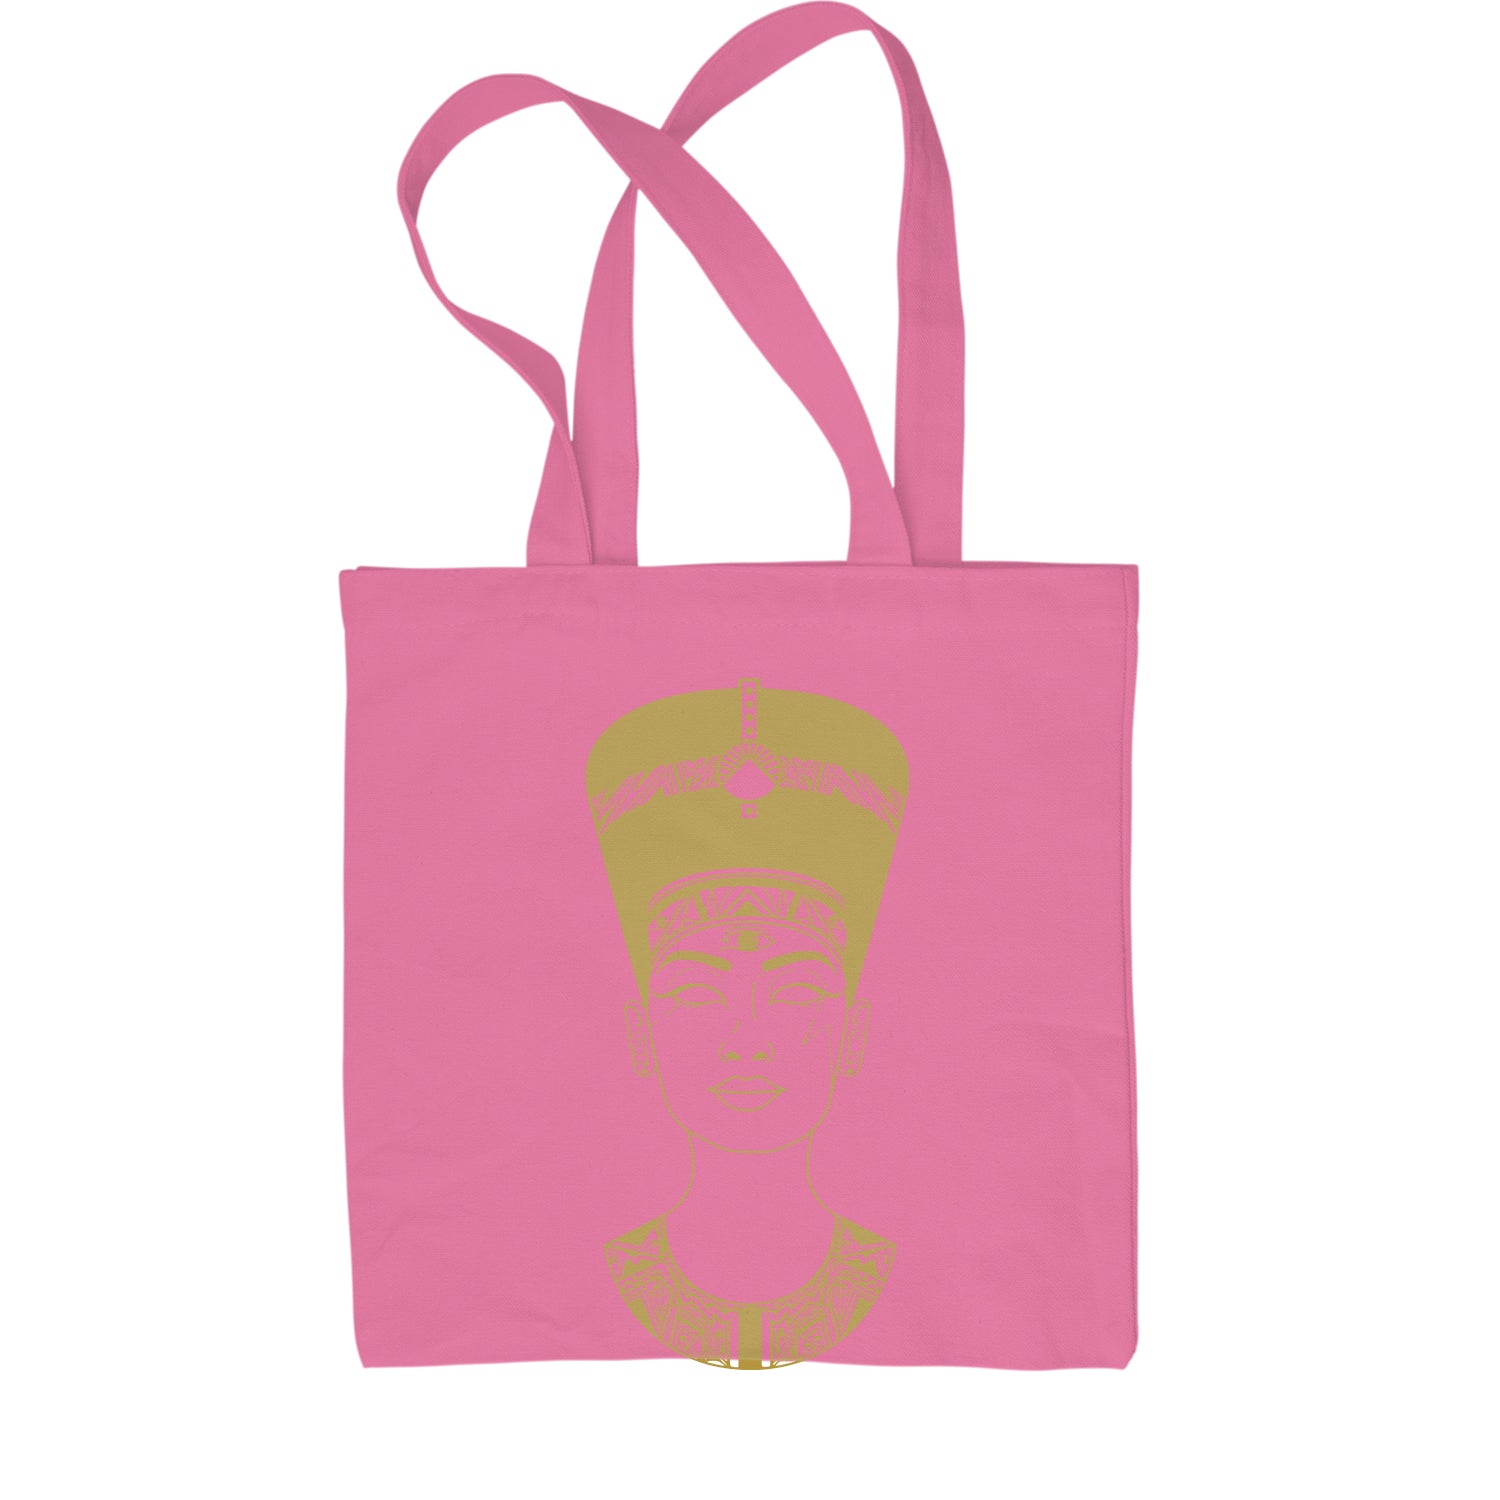 Nefertiti Egyptian Queen Shopping Tote Bag african, american, aten, egyptian, goddess by Expression Tees